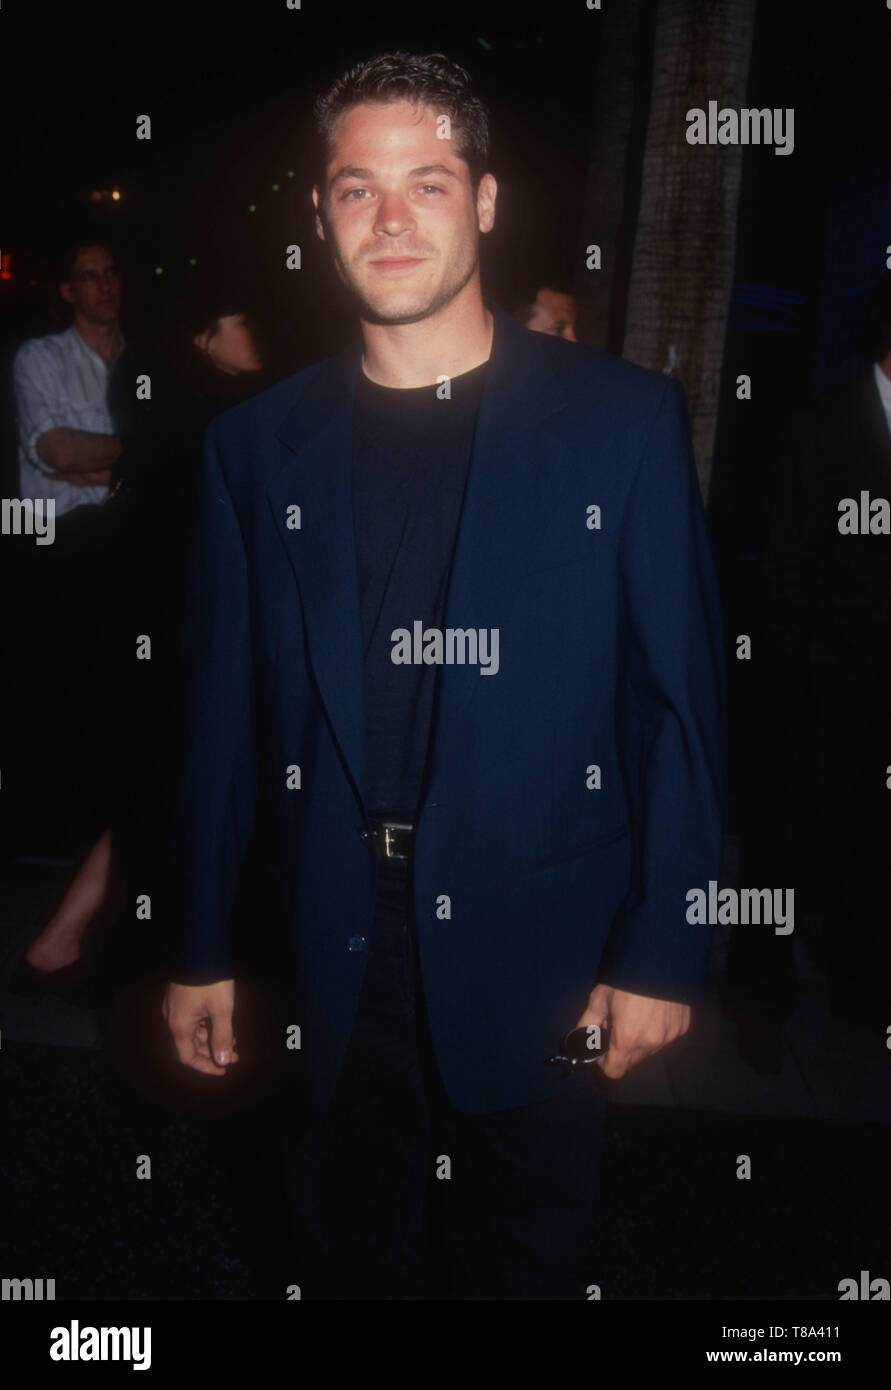 Hollywood, California, USA 13th April 1994 Actor David Barry Gray attends the 'Backbeat' Hollywood Premiere on April 13, 1994 at Galaxy Theatre in Hollywood, California, USA. Photo by Barry King/Alamy Stock Photo Stock Photo